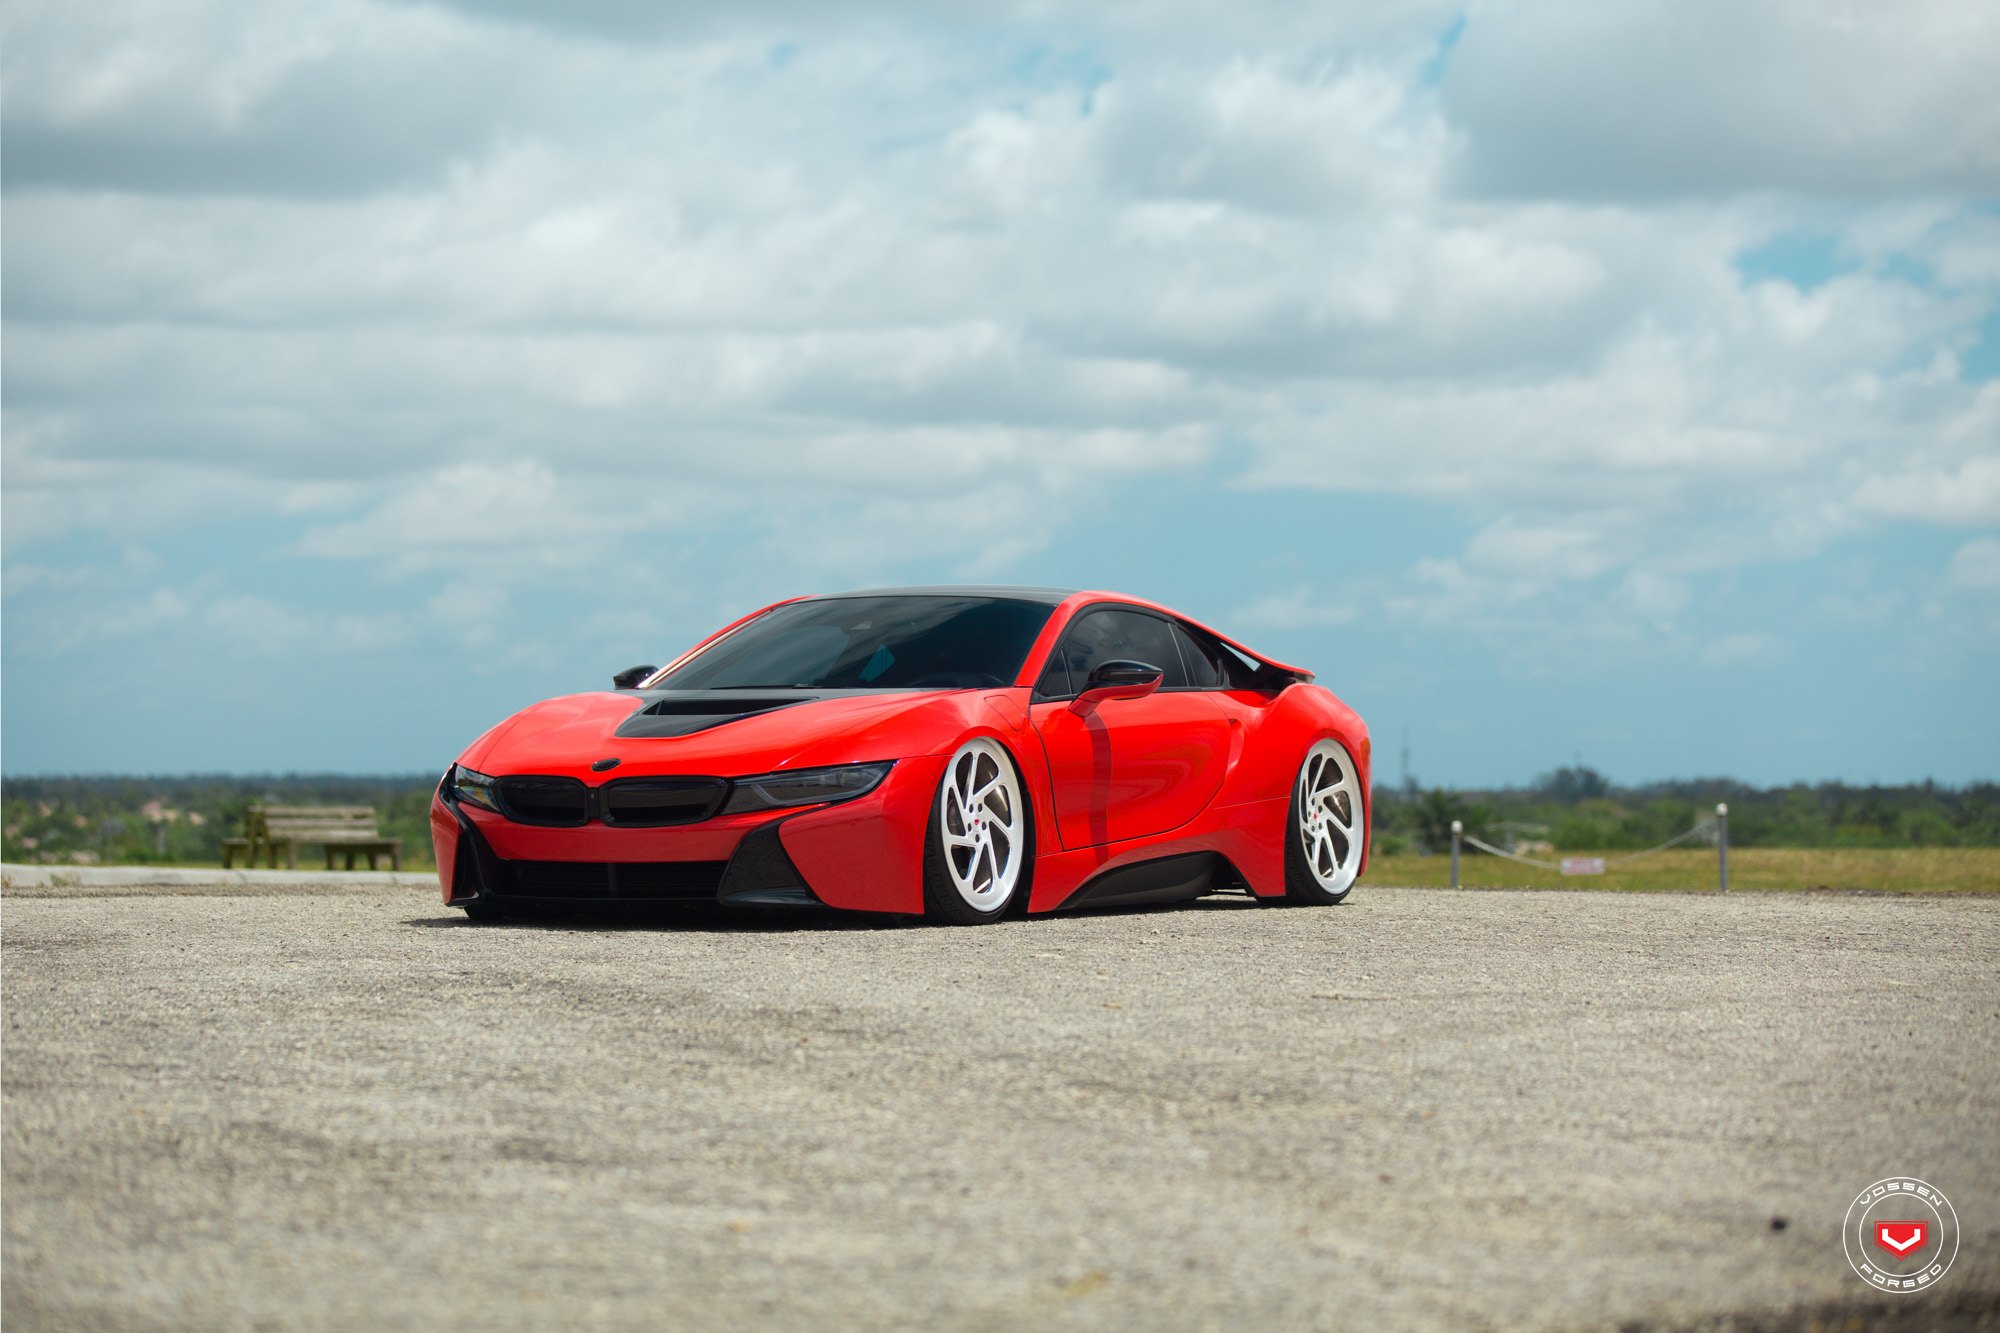 Red Shark Bmw i8 on Air Bags and Vossen Forged Wheels - Photo by Vossen